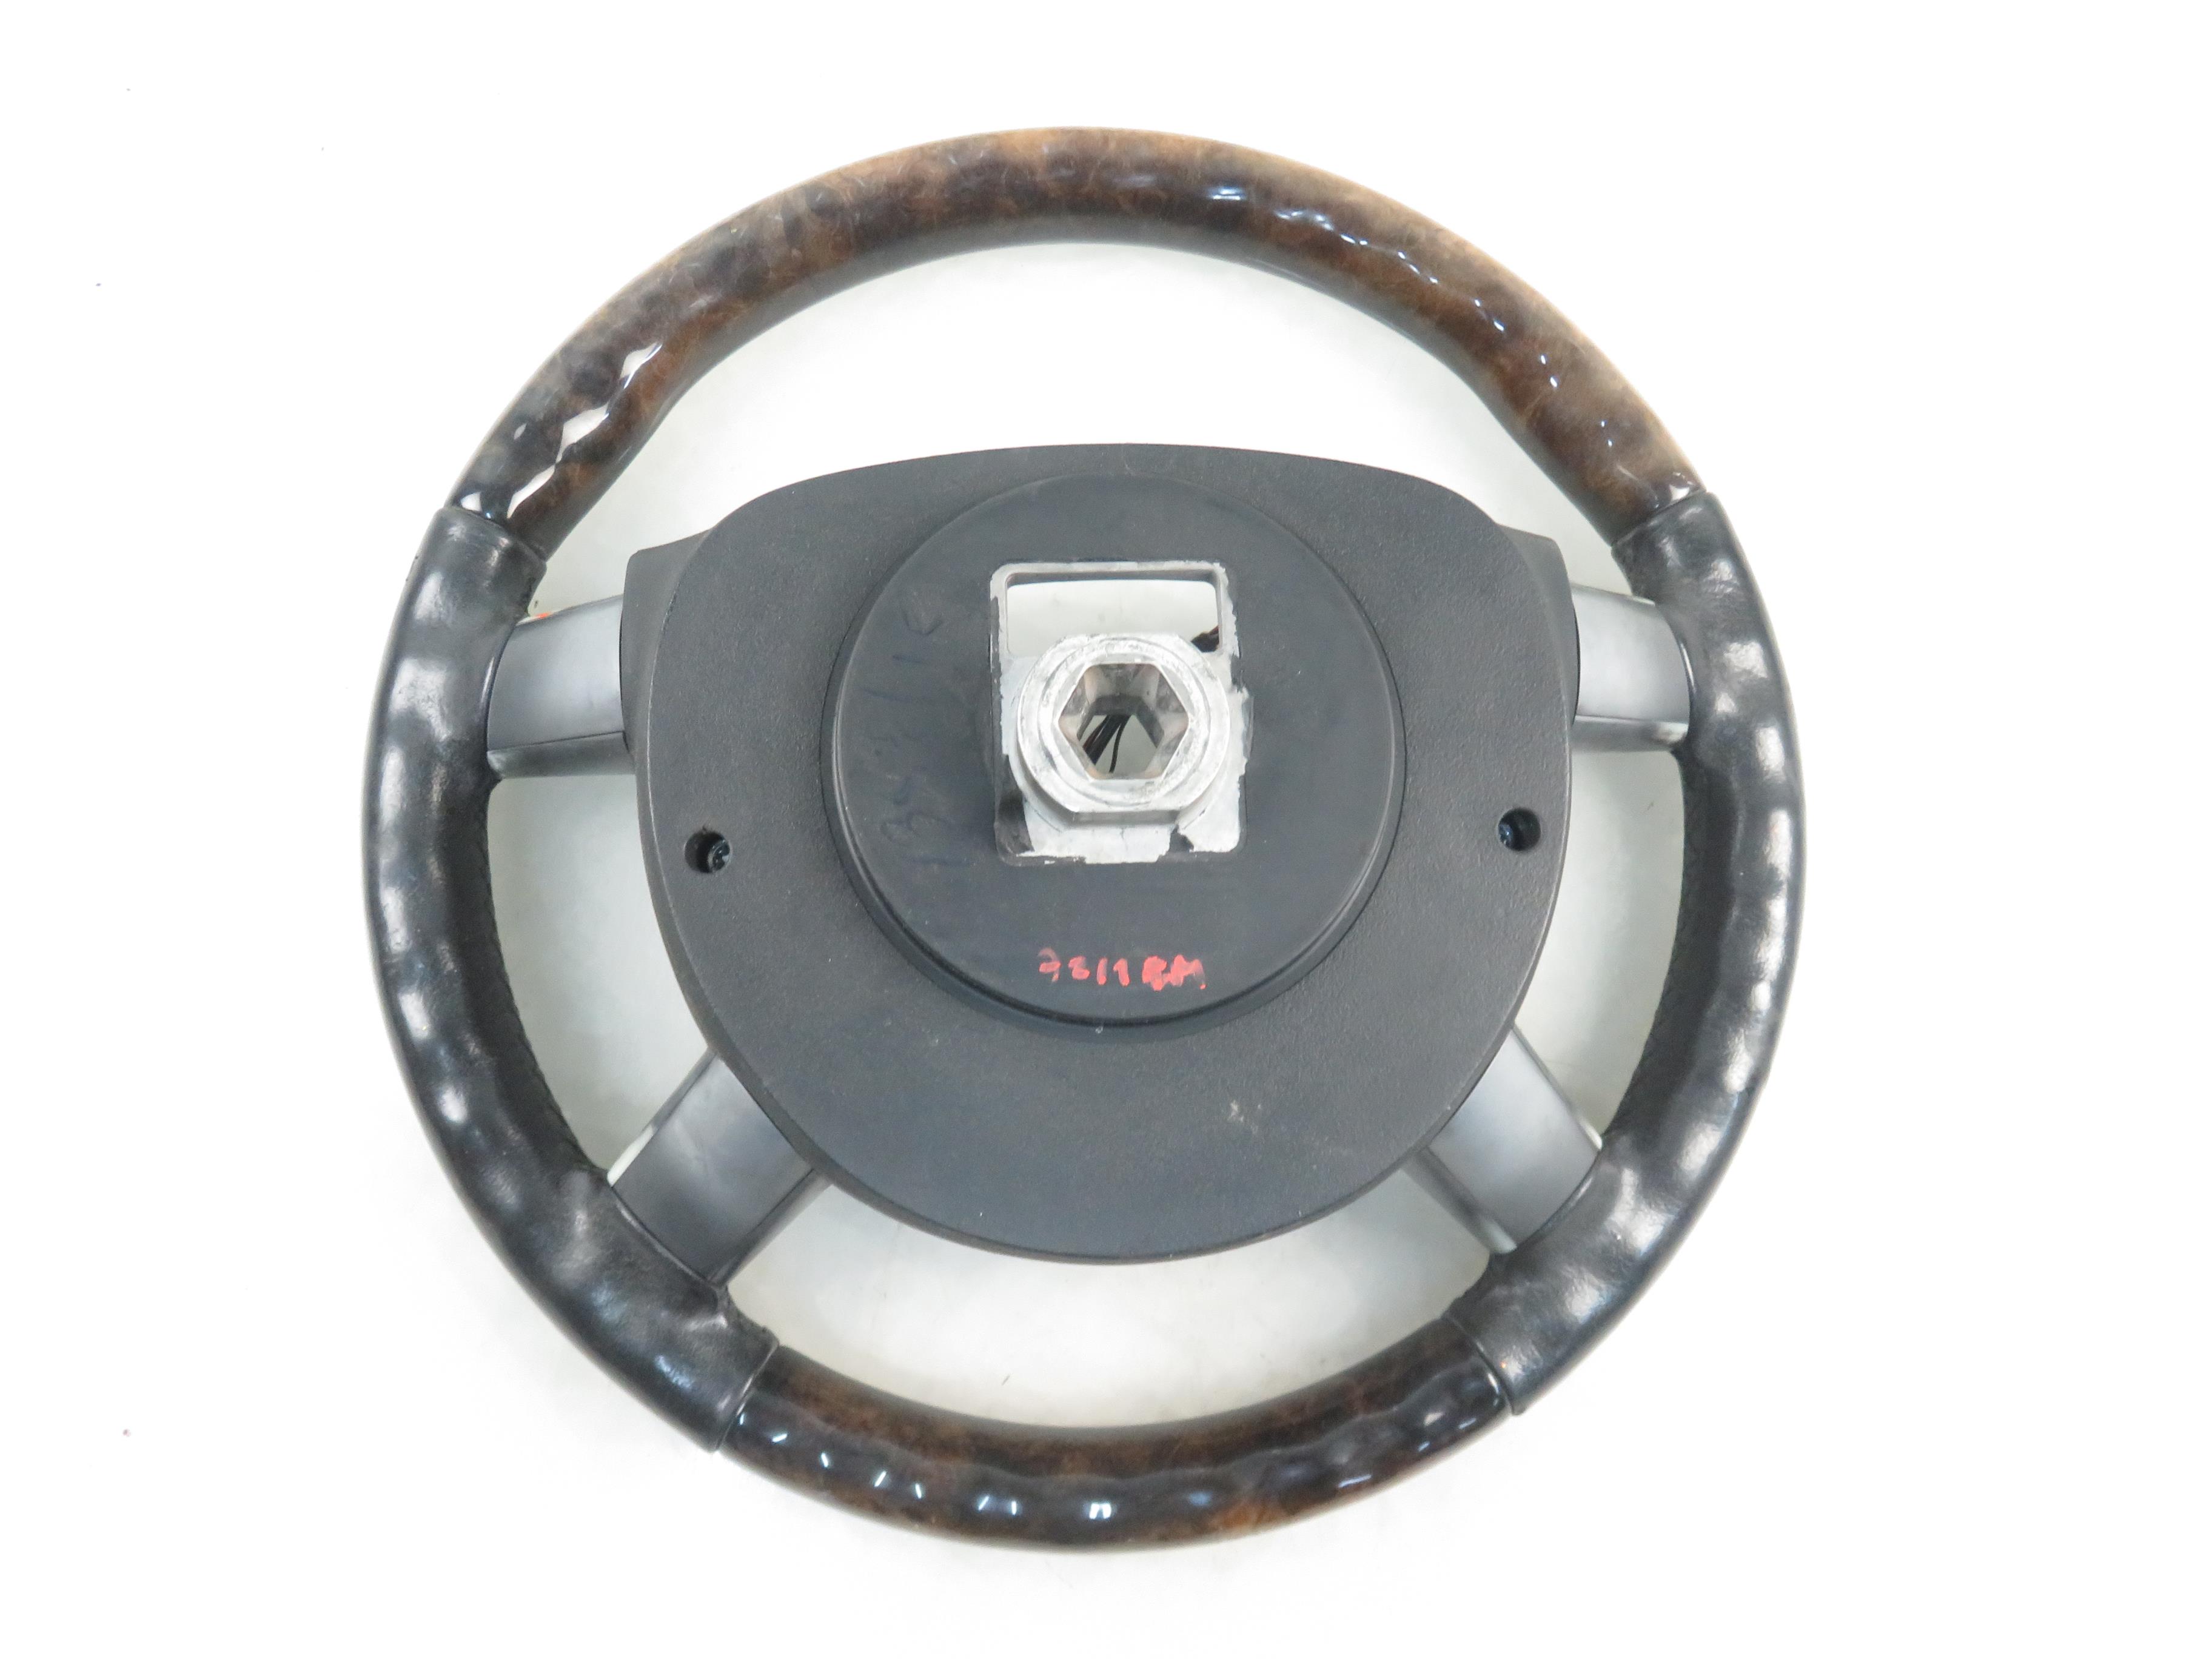 FORD Mondeo 3 generation (2000-2007) Steering Wheel 3S713599GBW 24694188